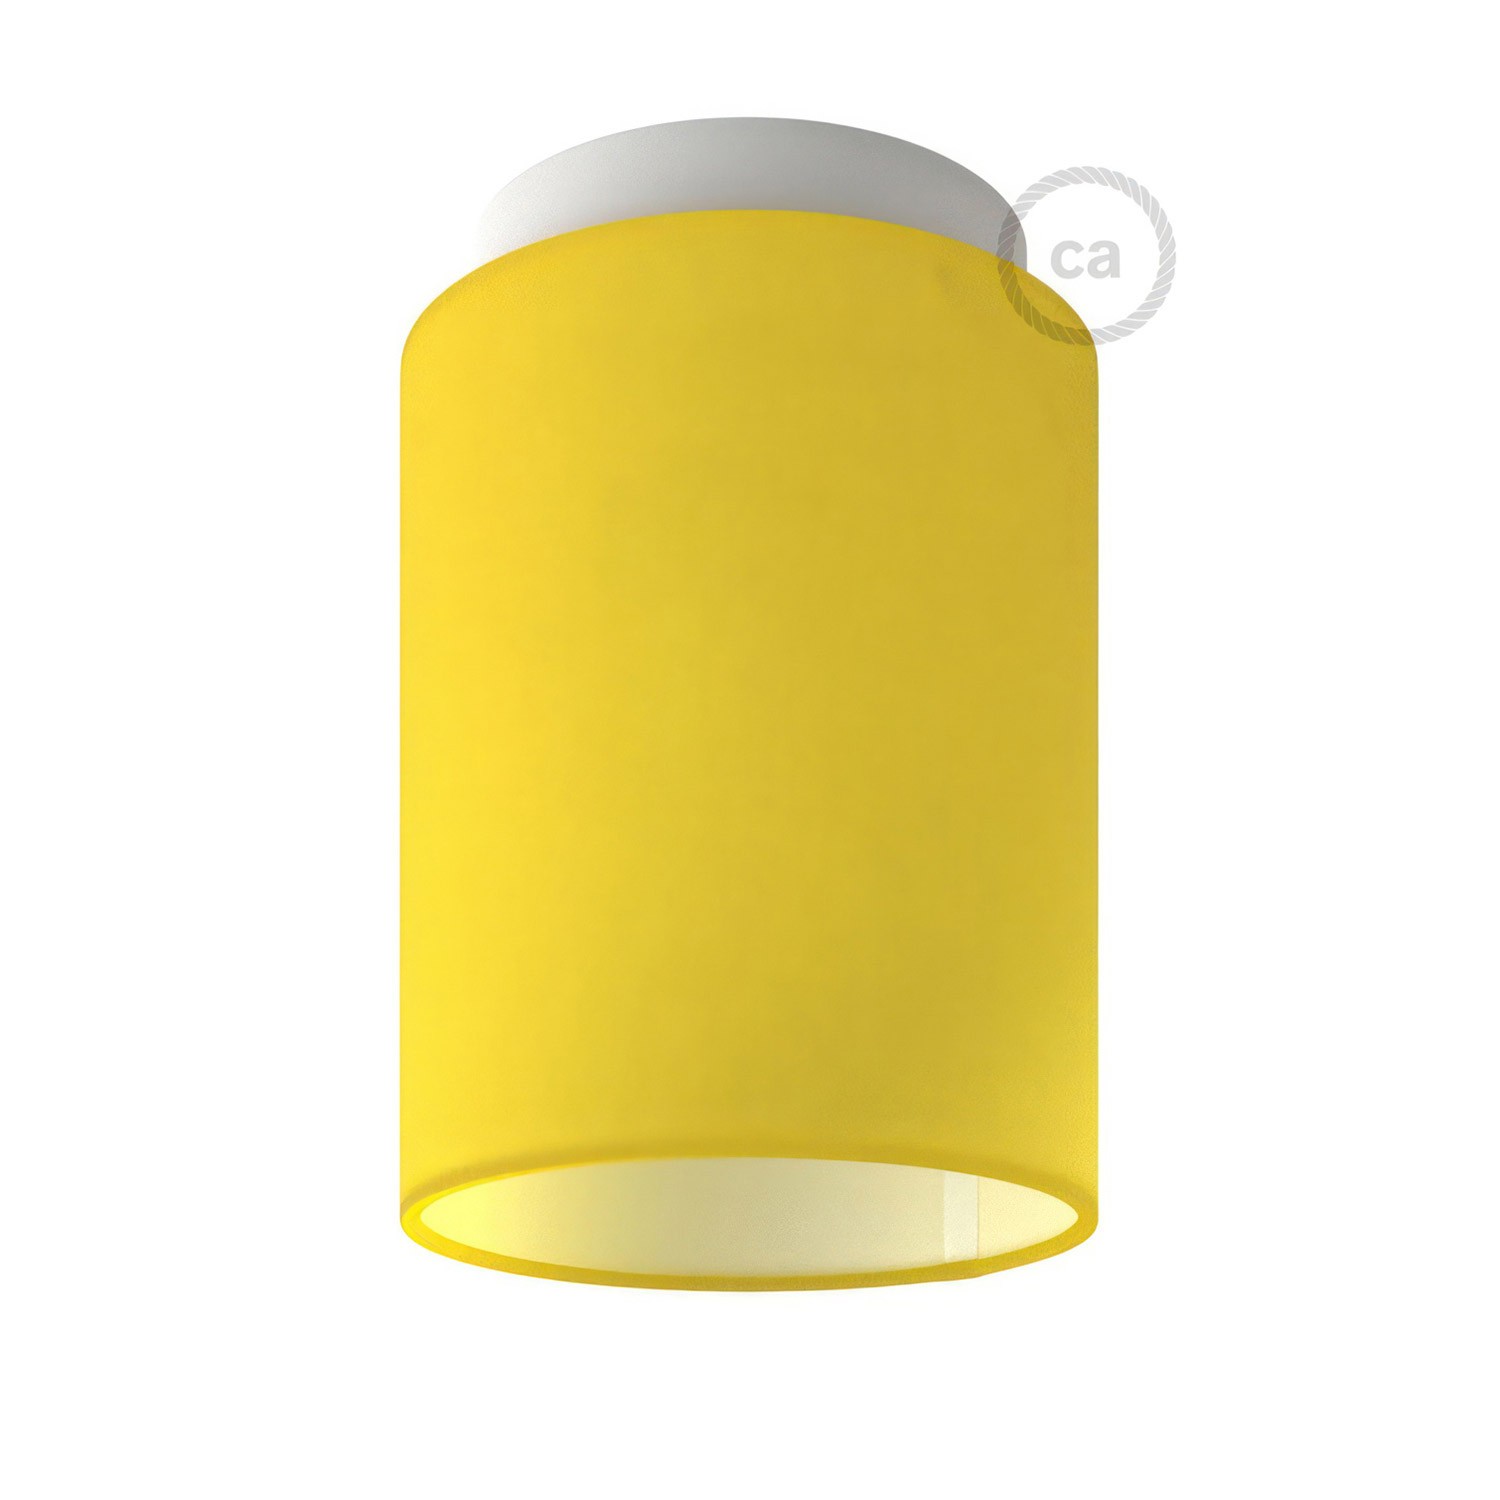 Fermaluce Color with Cylinder Lampshade, Ø 15cm h18cm, metal wall or ceiling flush light